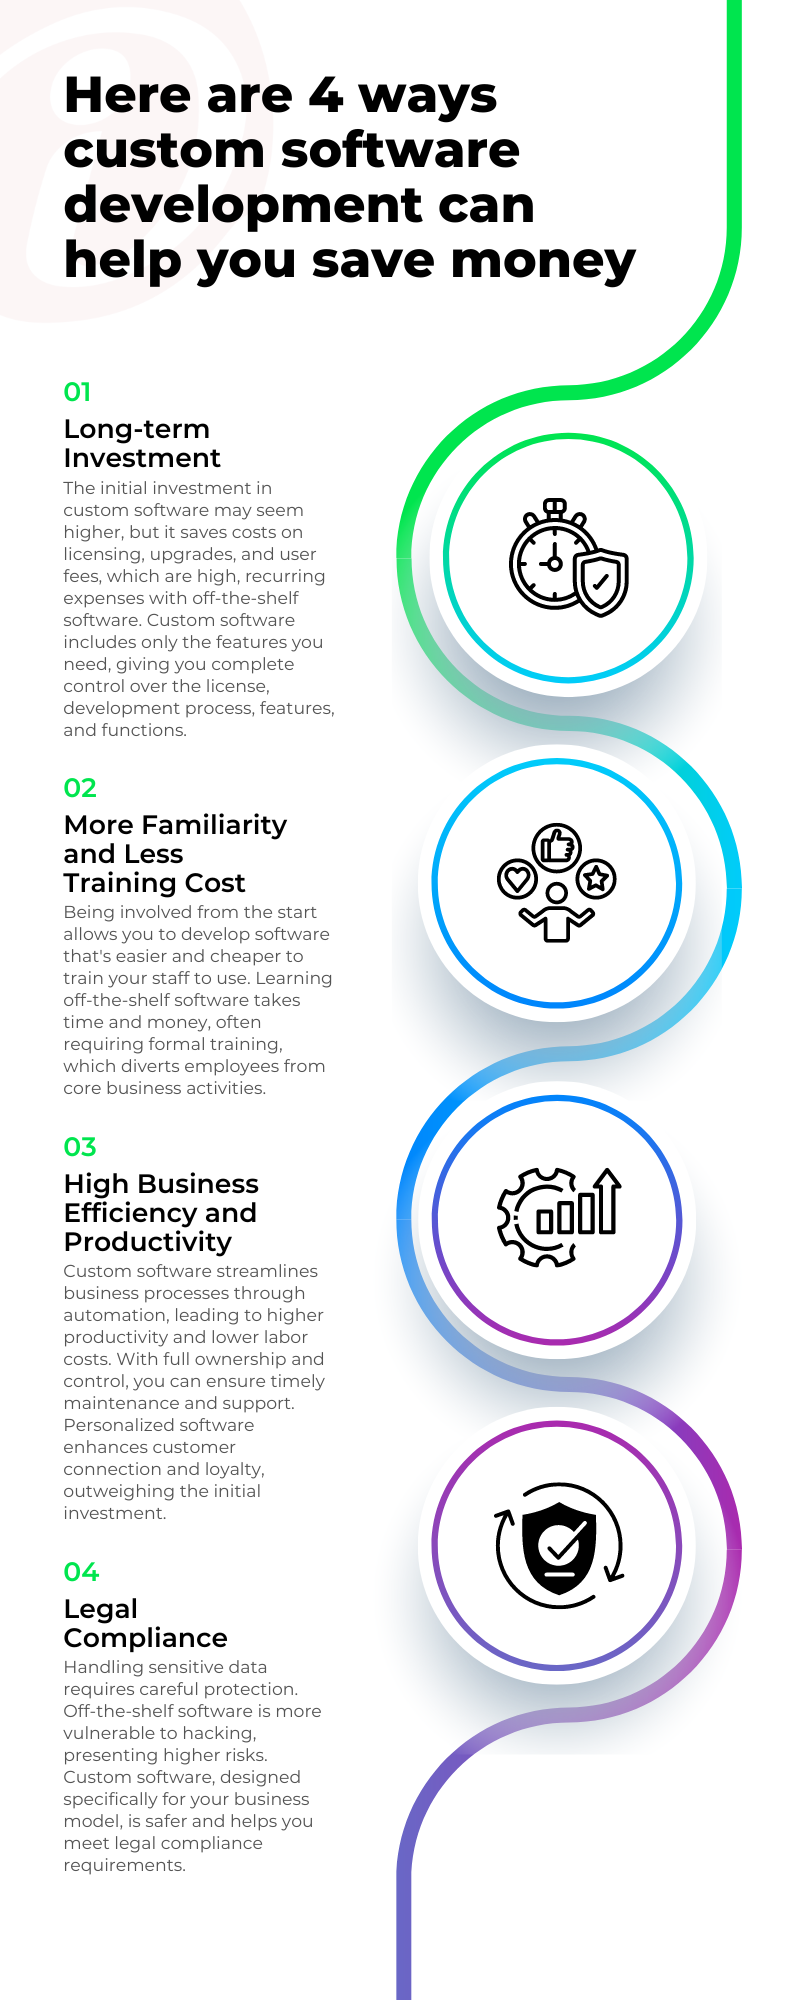 Short Infographics - Here are 4 ways custom software development can help you save money